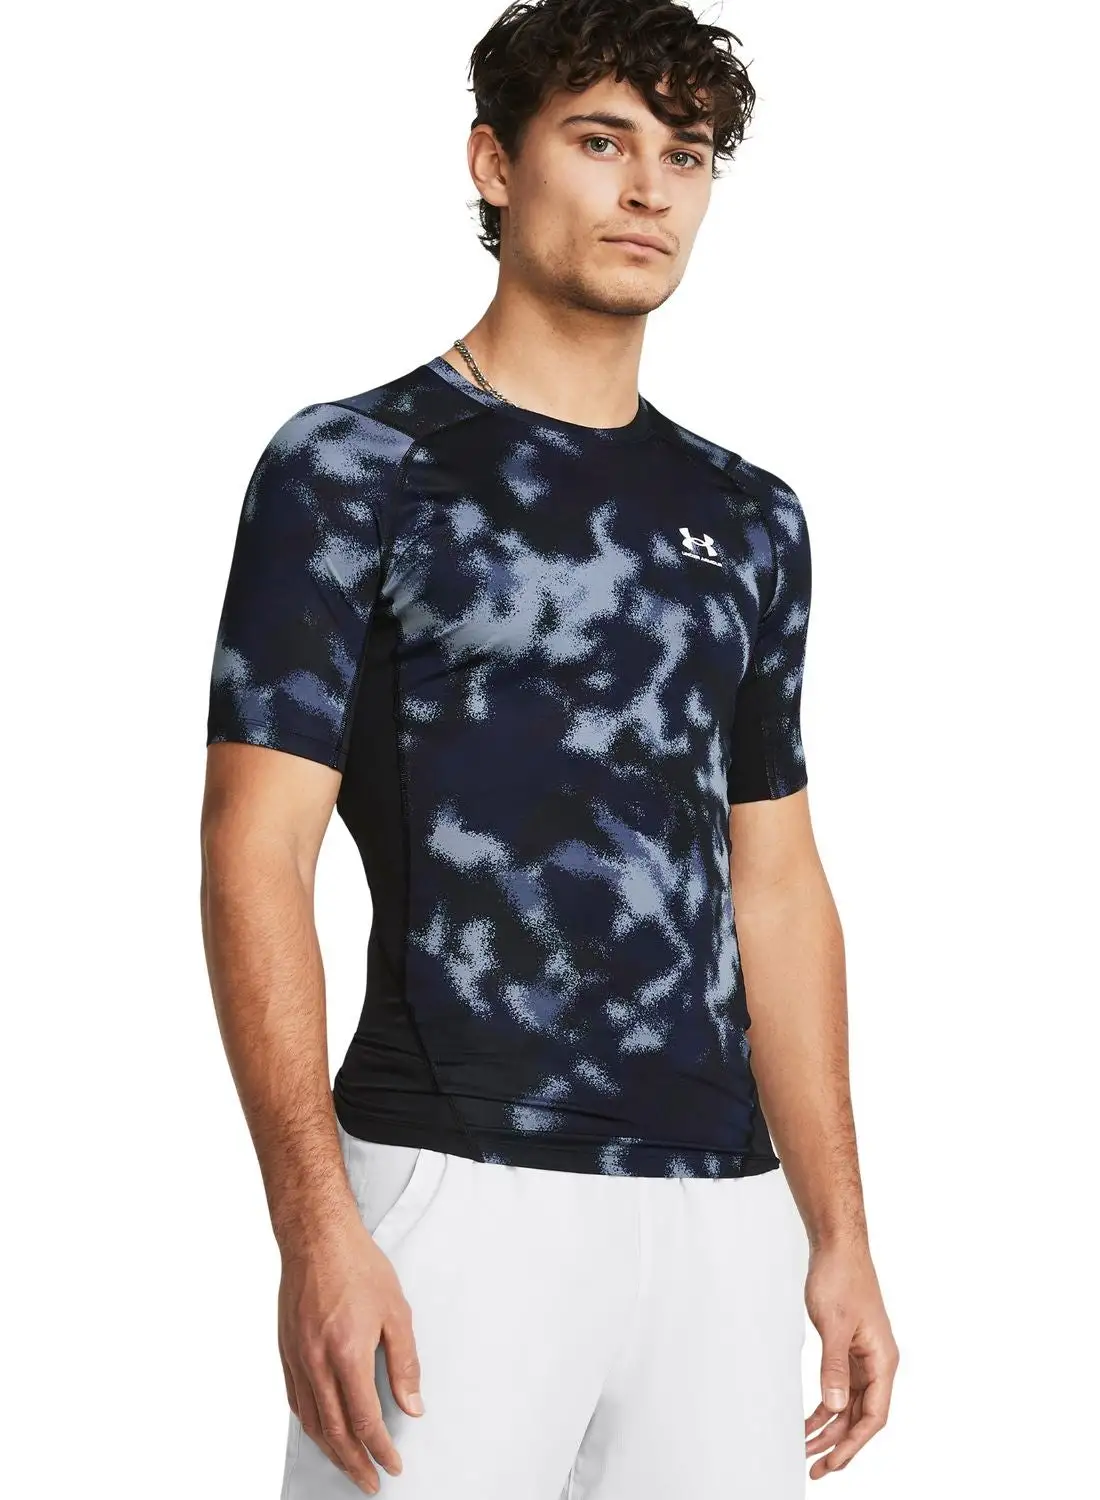 UNDER ARMOUR Heatgear Armour Printed Compression T-Shirt